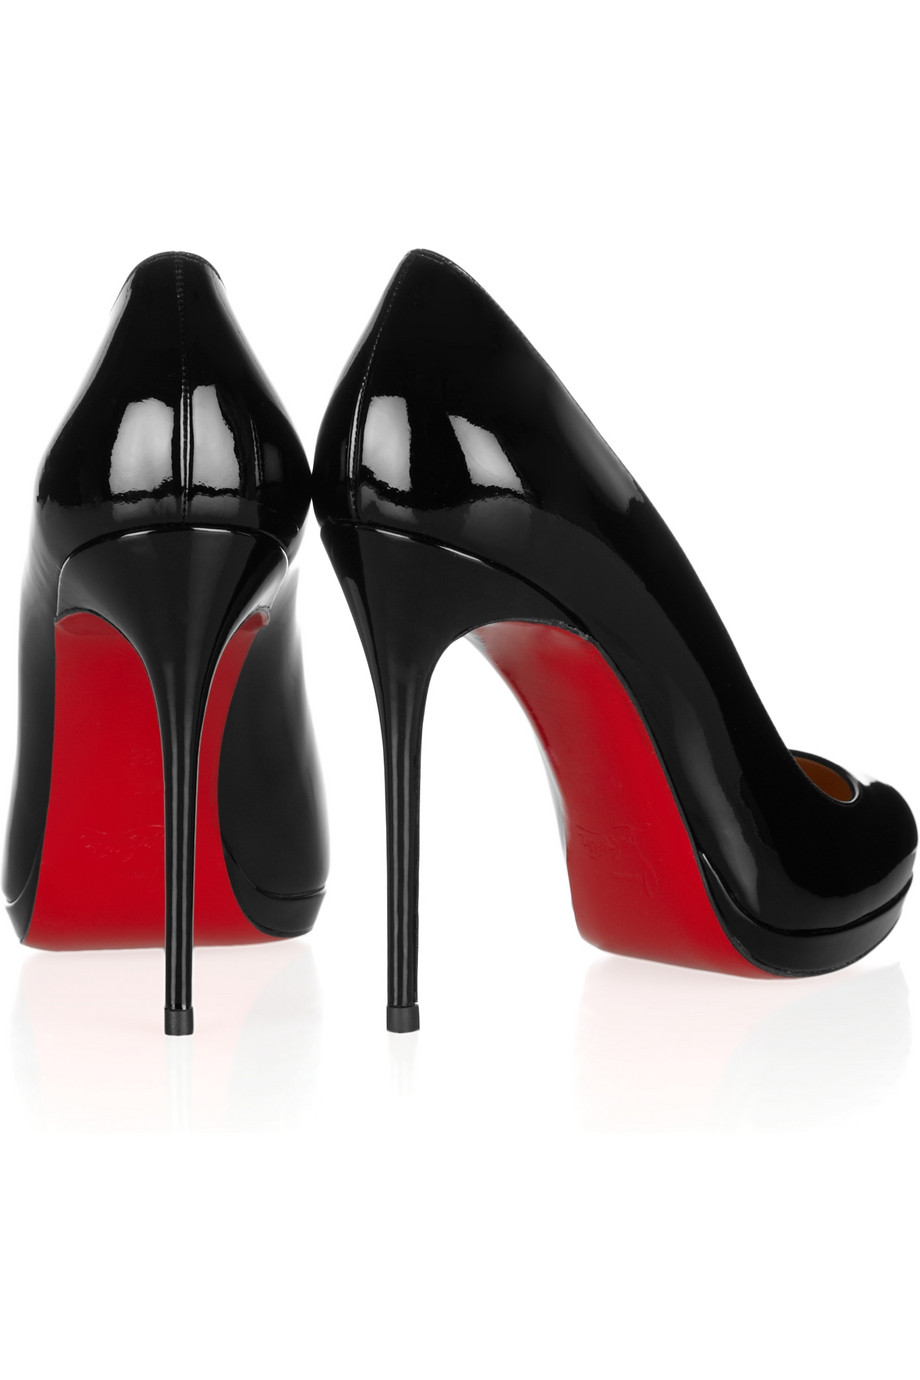 Lyst - Christian louboutin Filo 120 Patentleather Pumps in Black